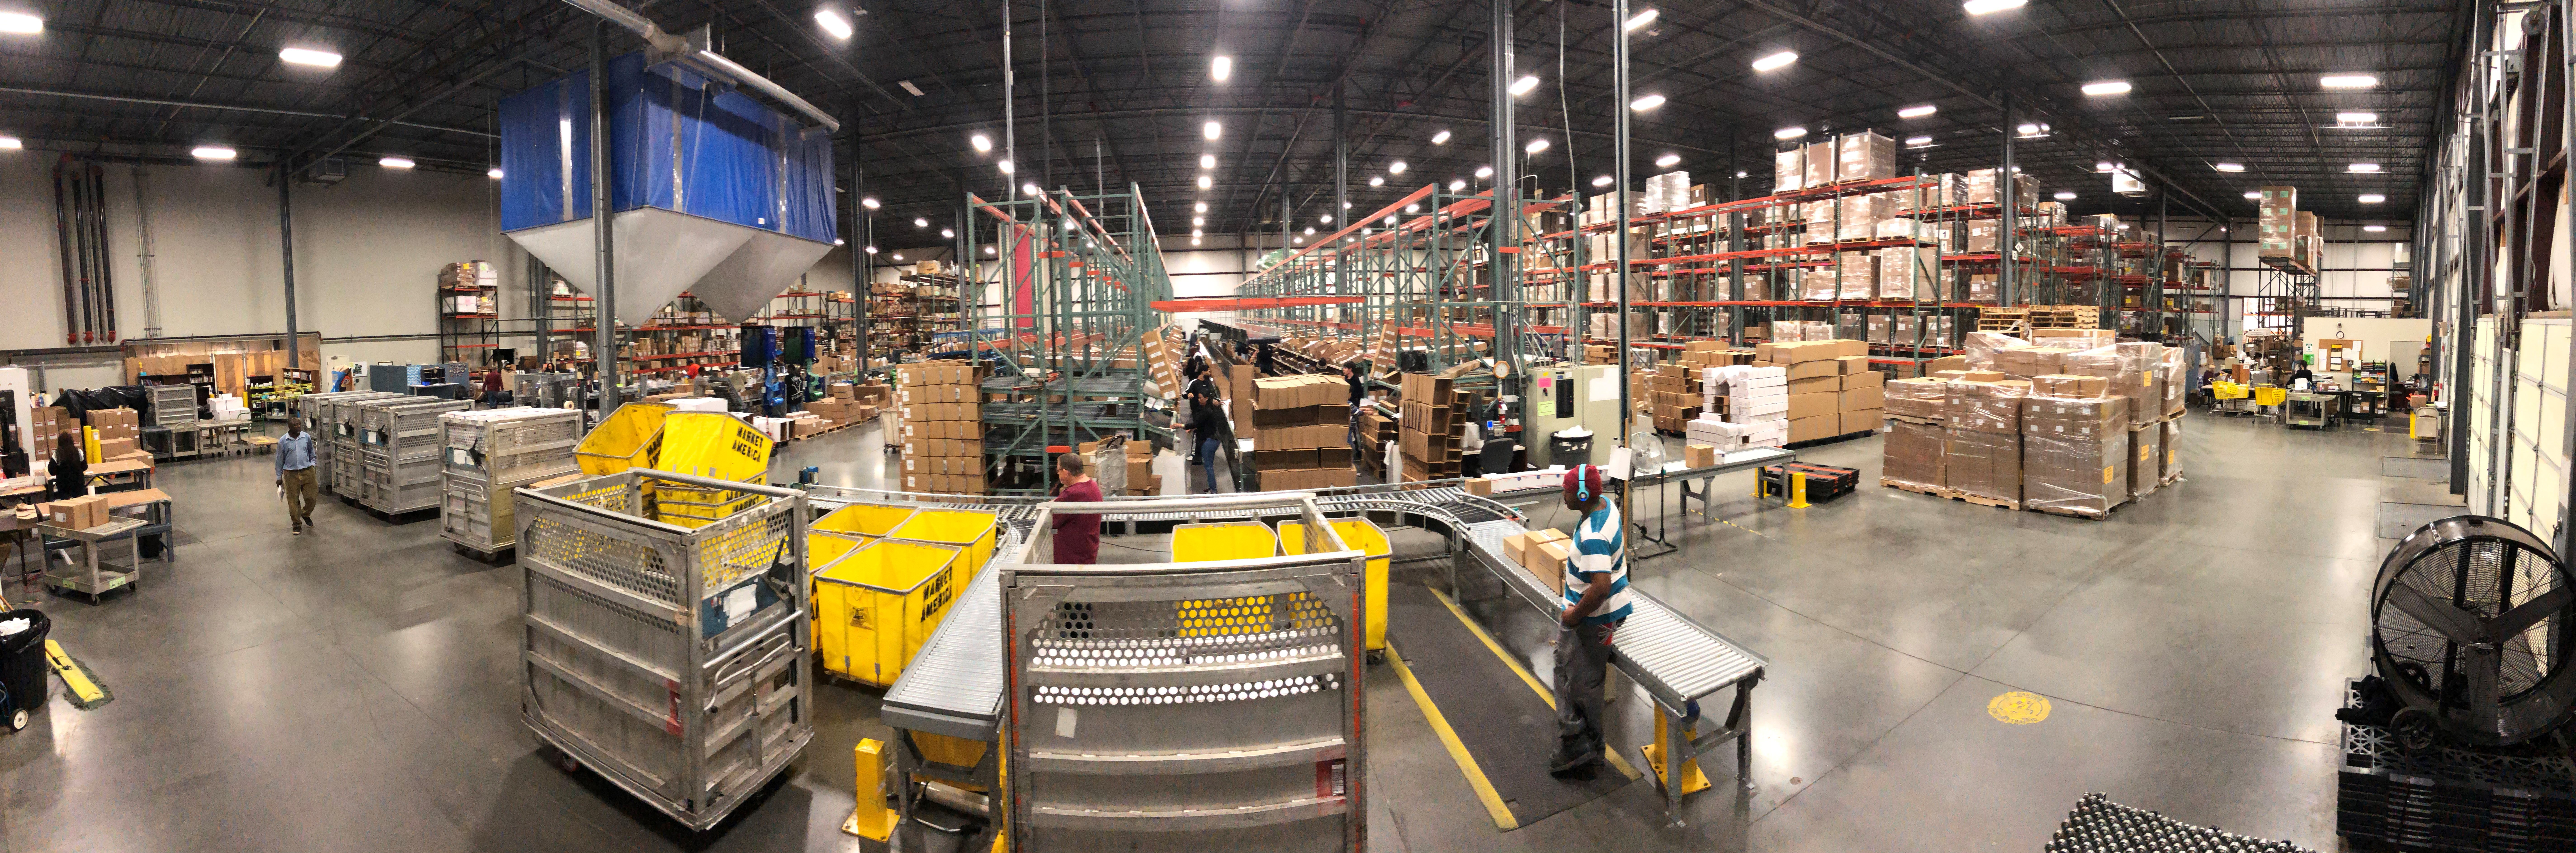 How Warehouse Technology Improves The Online Shopping Experience